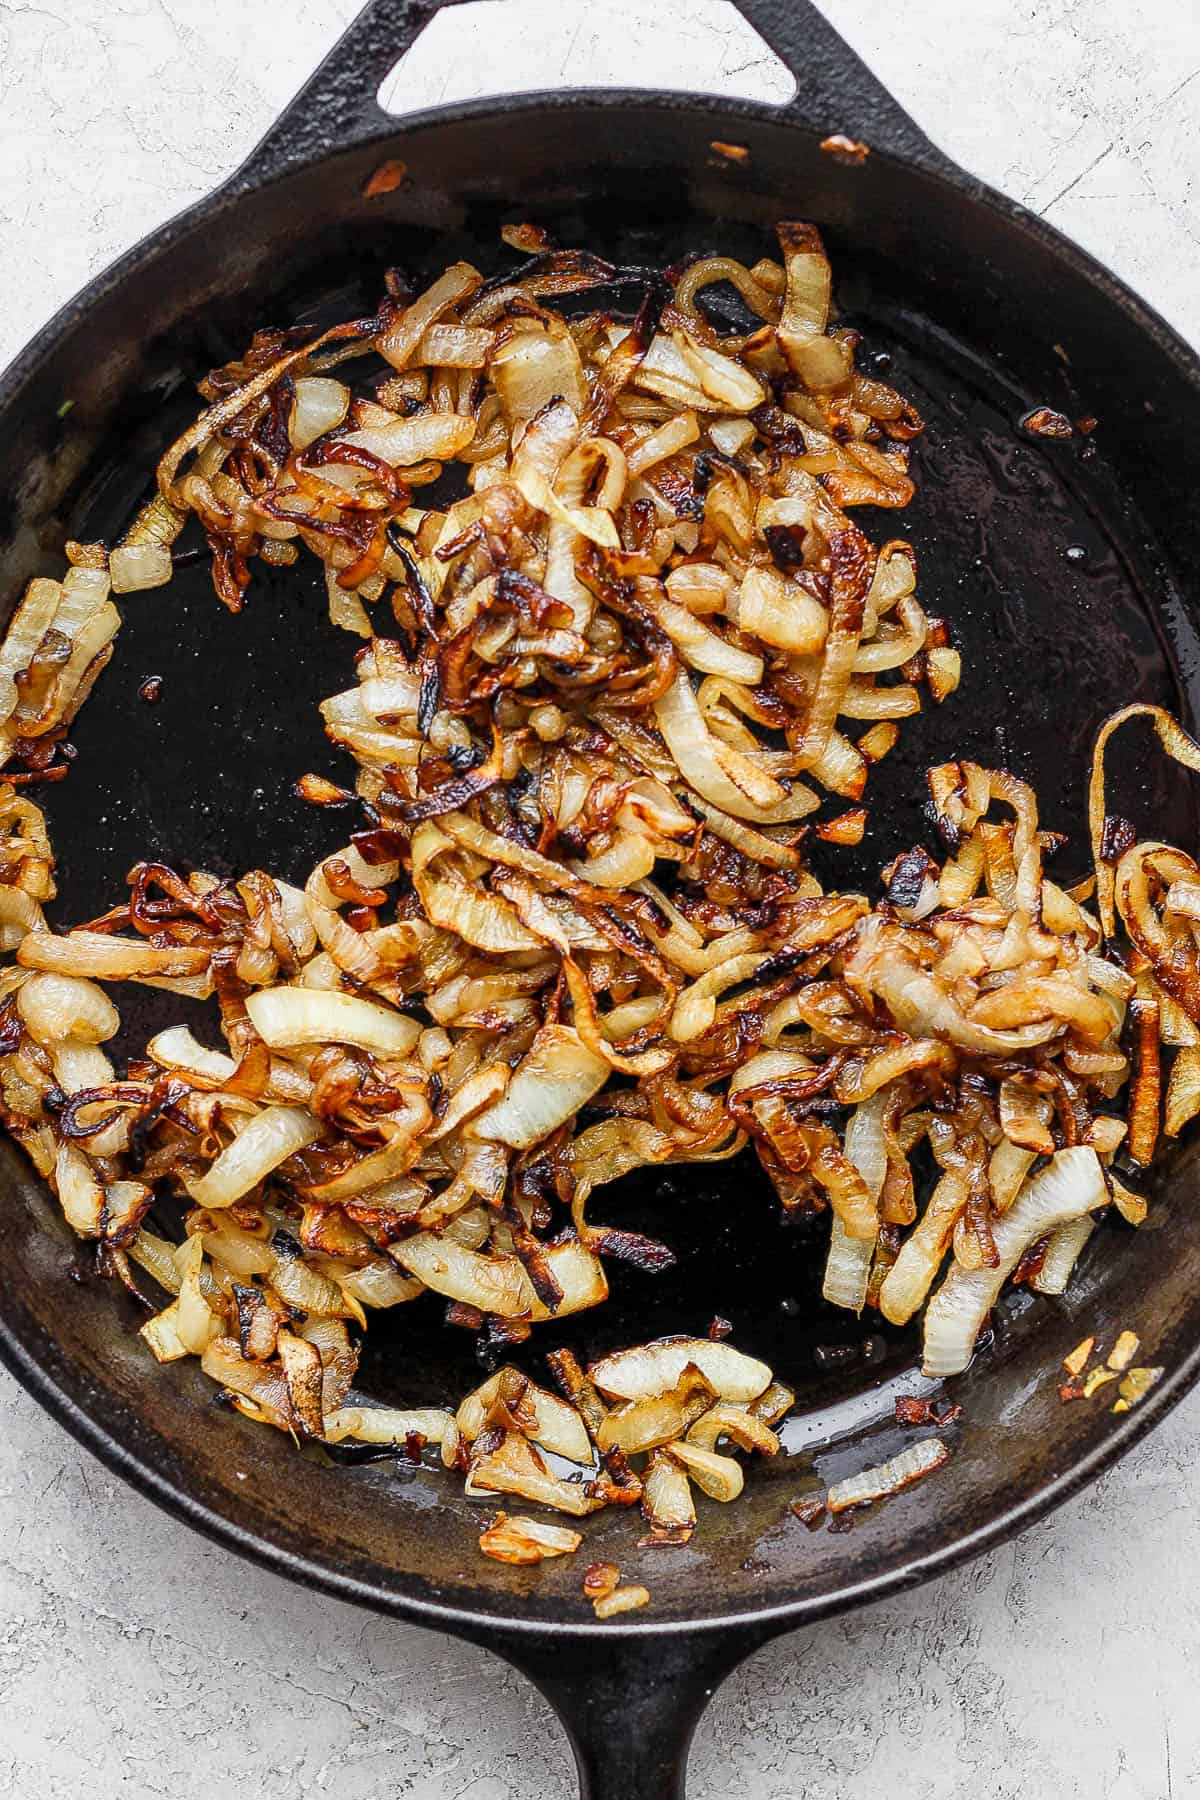 Caramelized onions in a cast iron skillet with garlic.